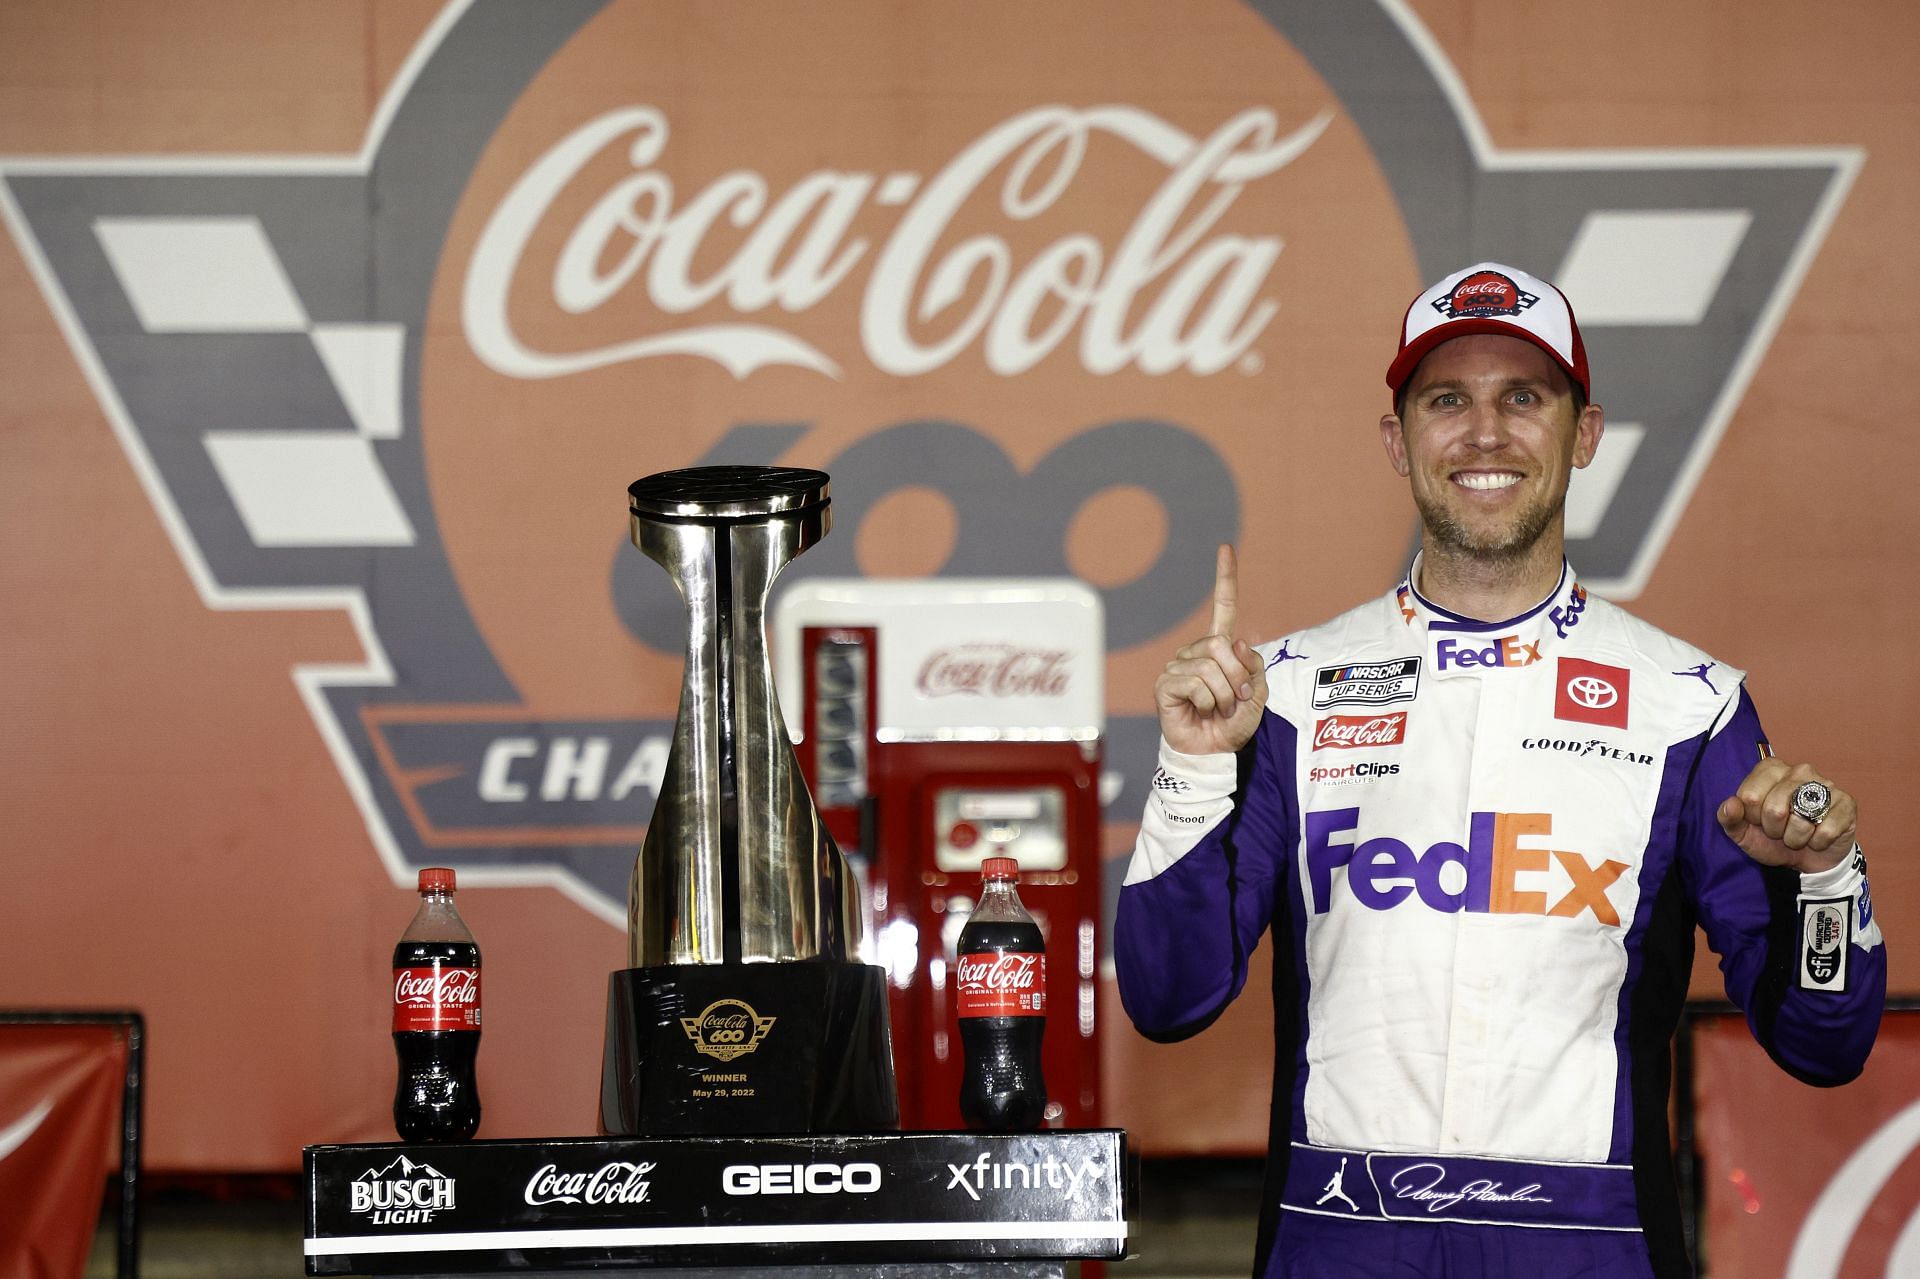 Denny Hamlin celebrates in Victory Lane after winning the NASCAR Cup Series Coca-Cola 600 at Charlotte Motor Speedway (Photo by Jared C. Tilton/Getty Images)